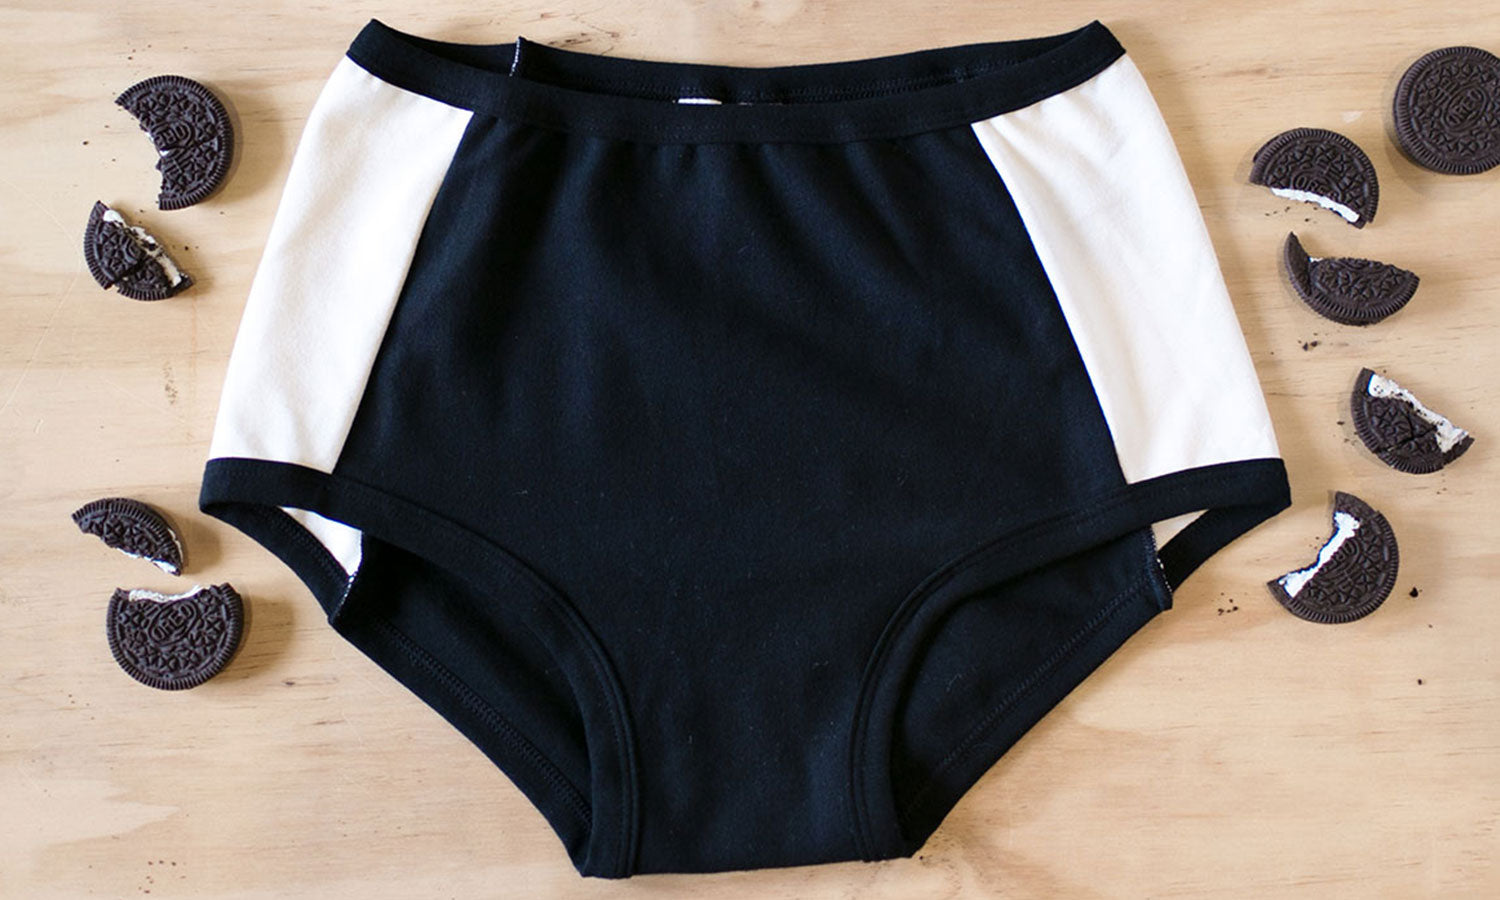 Flat lay of Thunderpants Panel Pant Original style underwear in Cookies and Cream - black center and white sides.